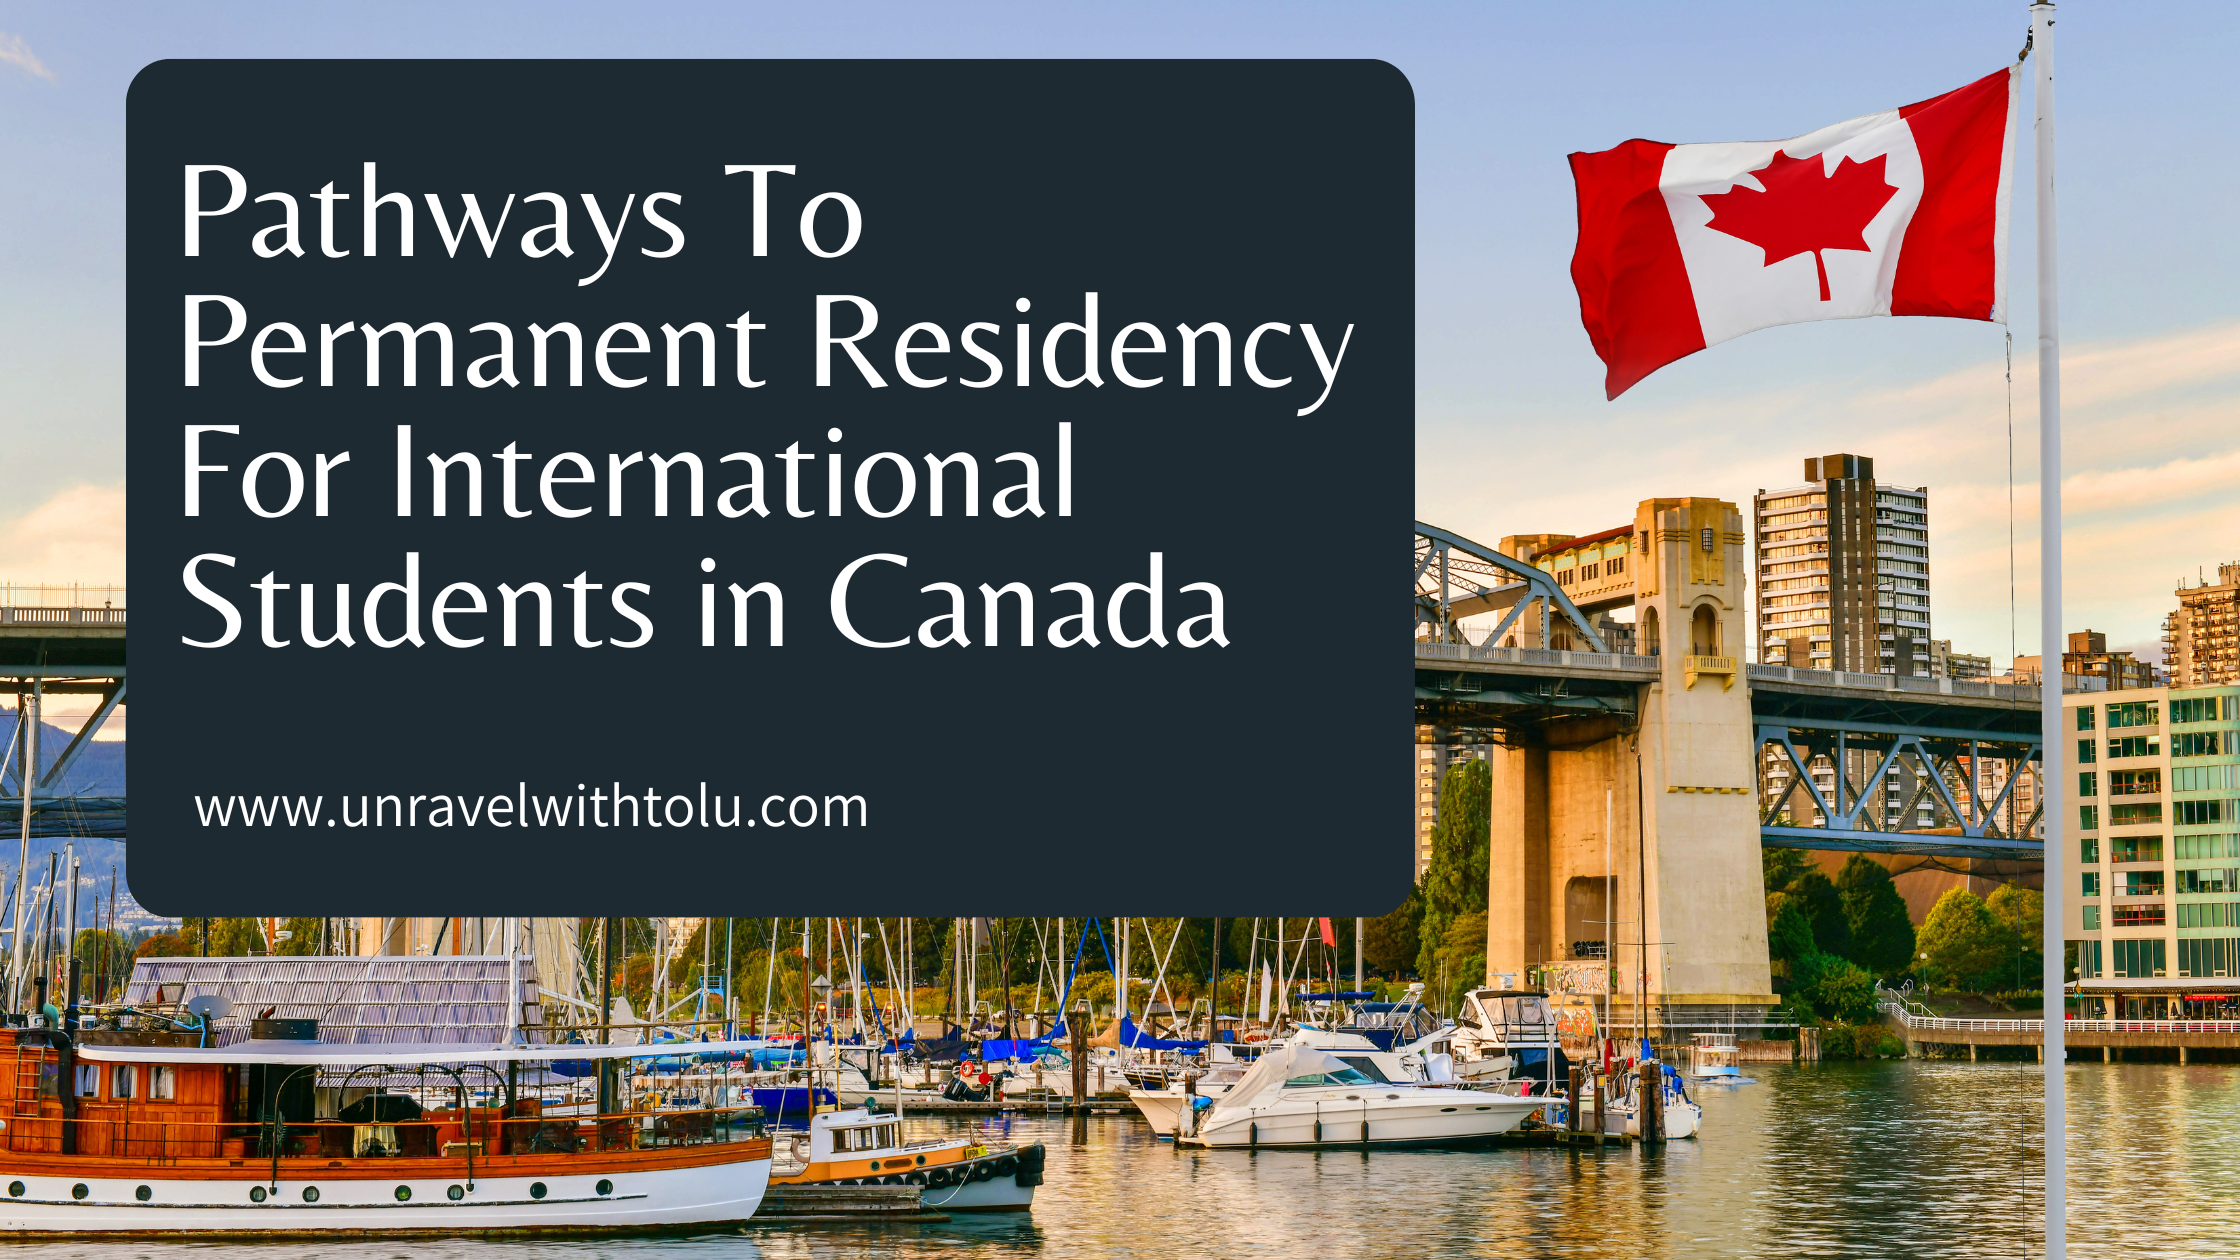 Pathways To Permanent Residency For International Students in Canada